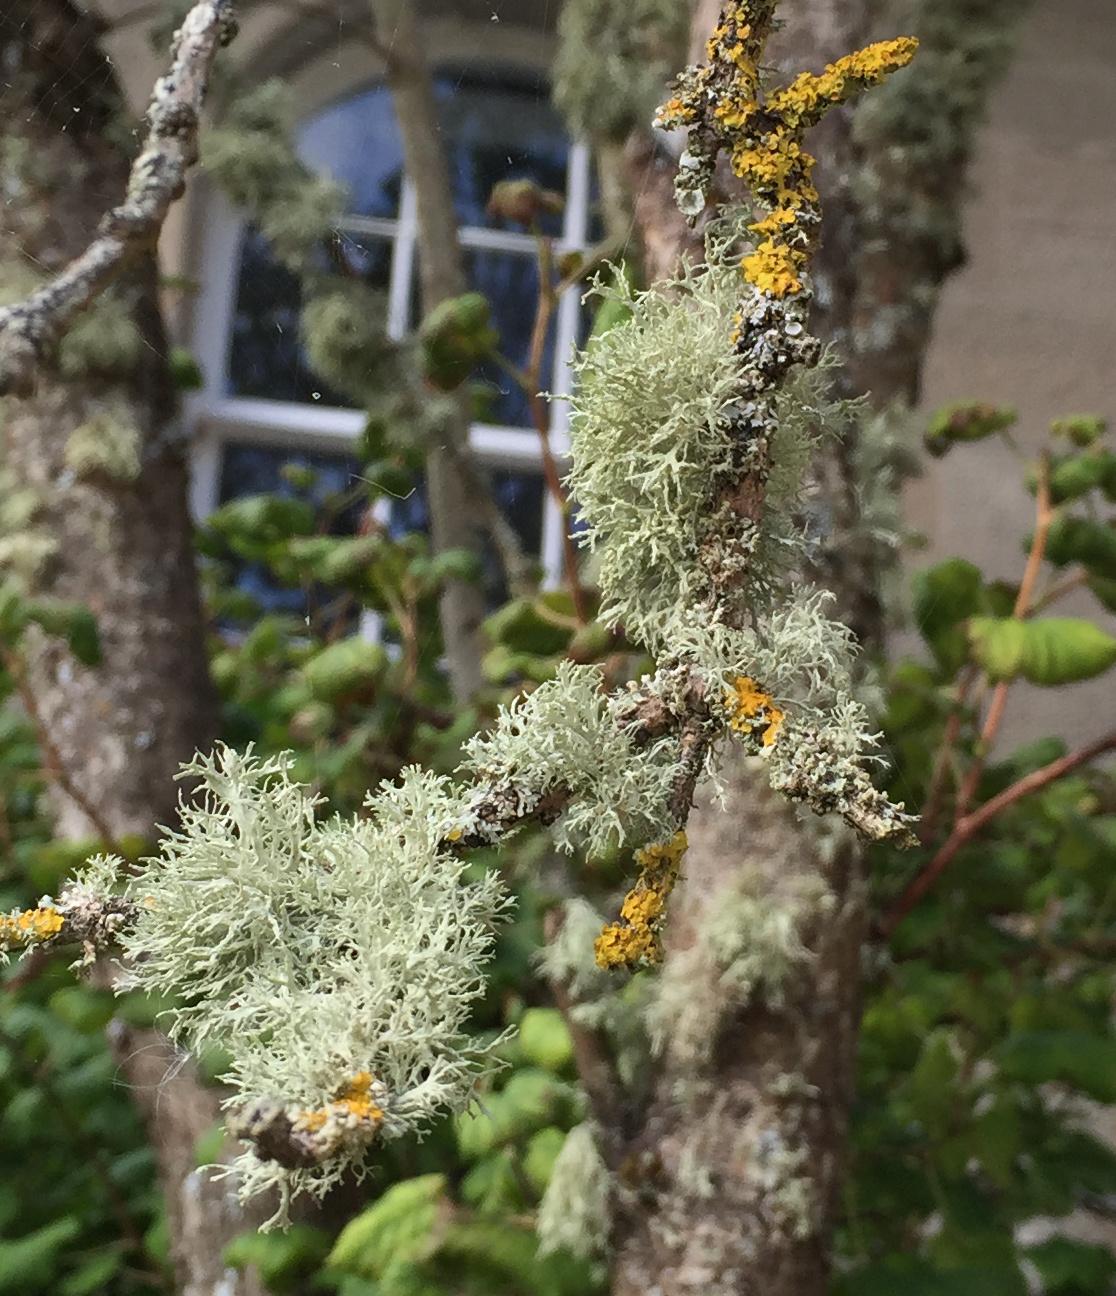 Fruticose (light green) and crustose (yellow) lichens growing on a tree.